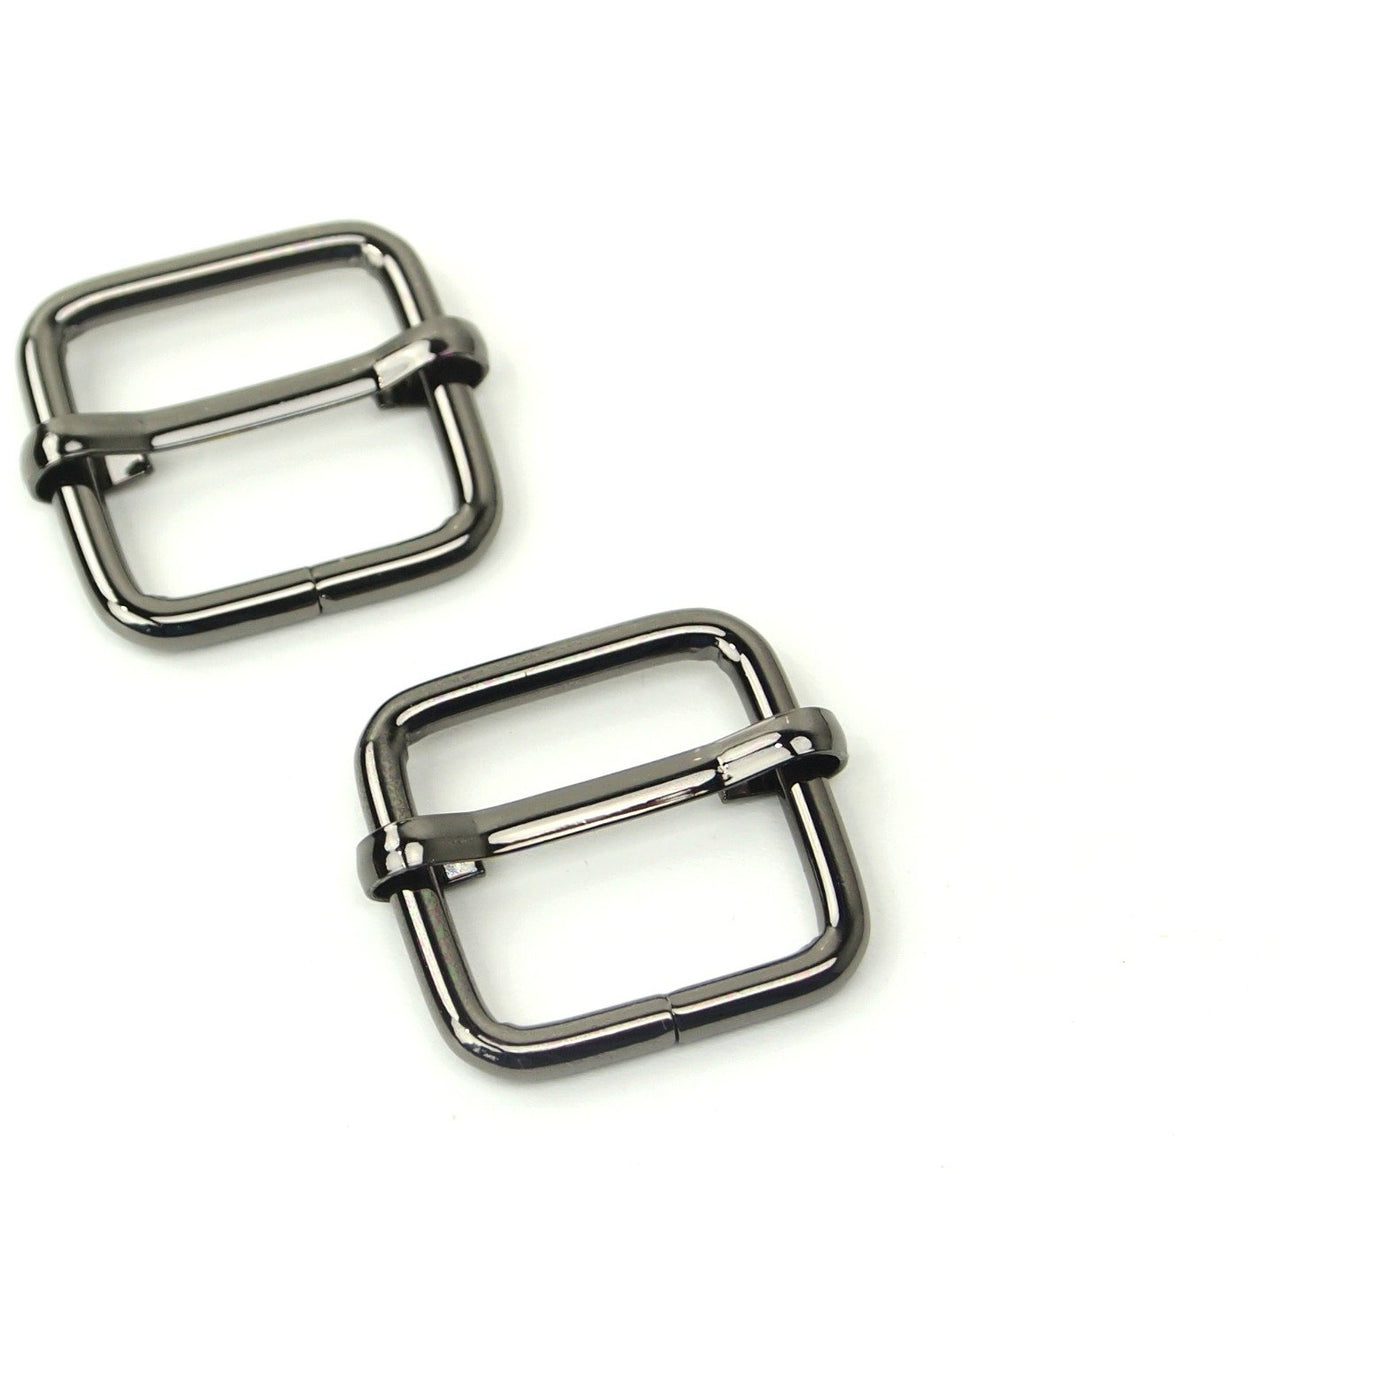 Two 3/4" Slider Buckles